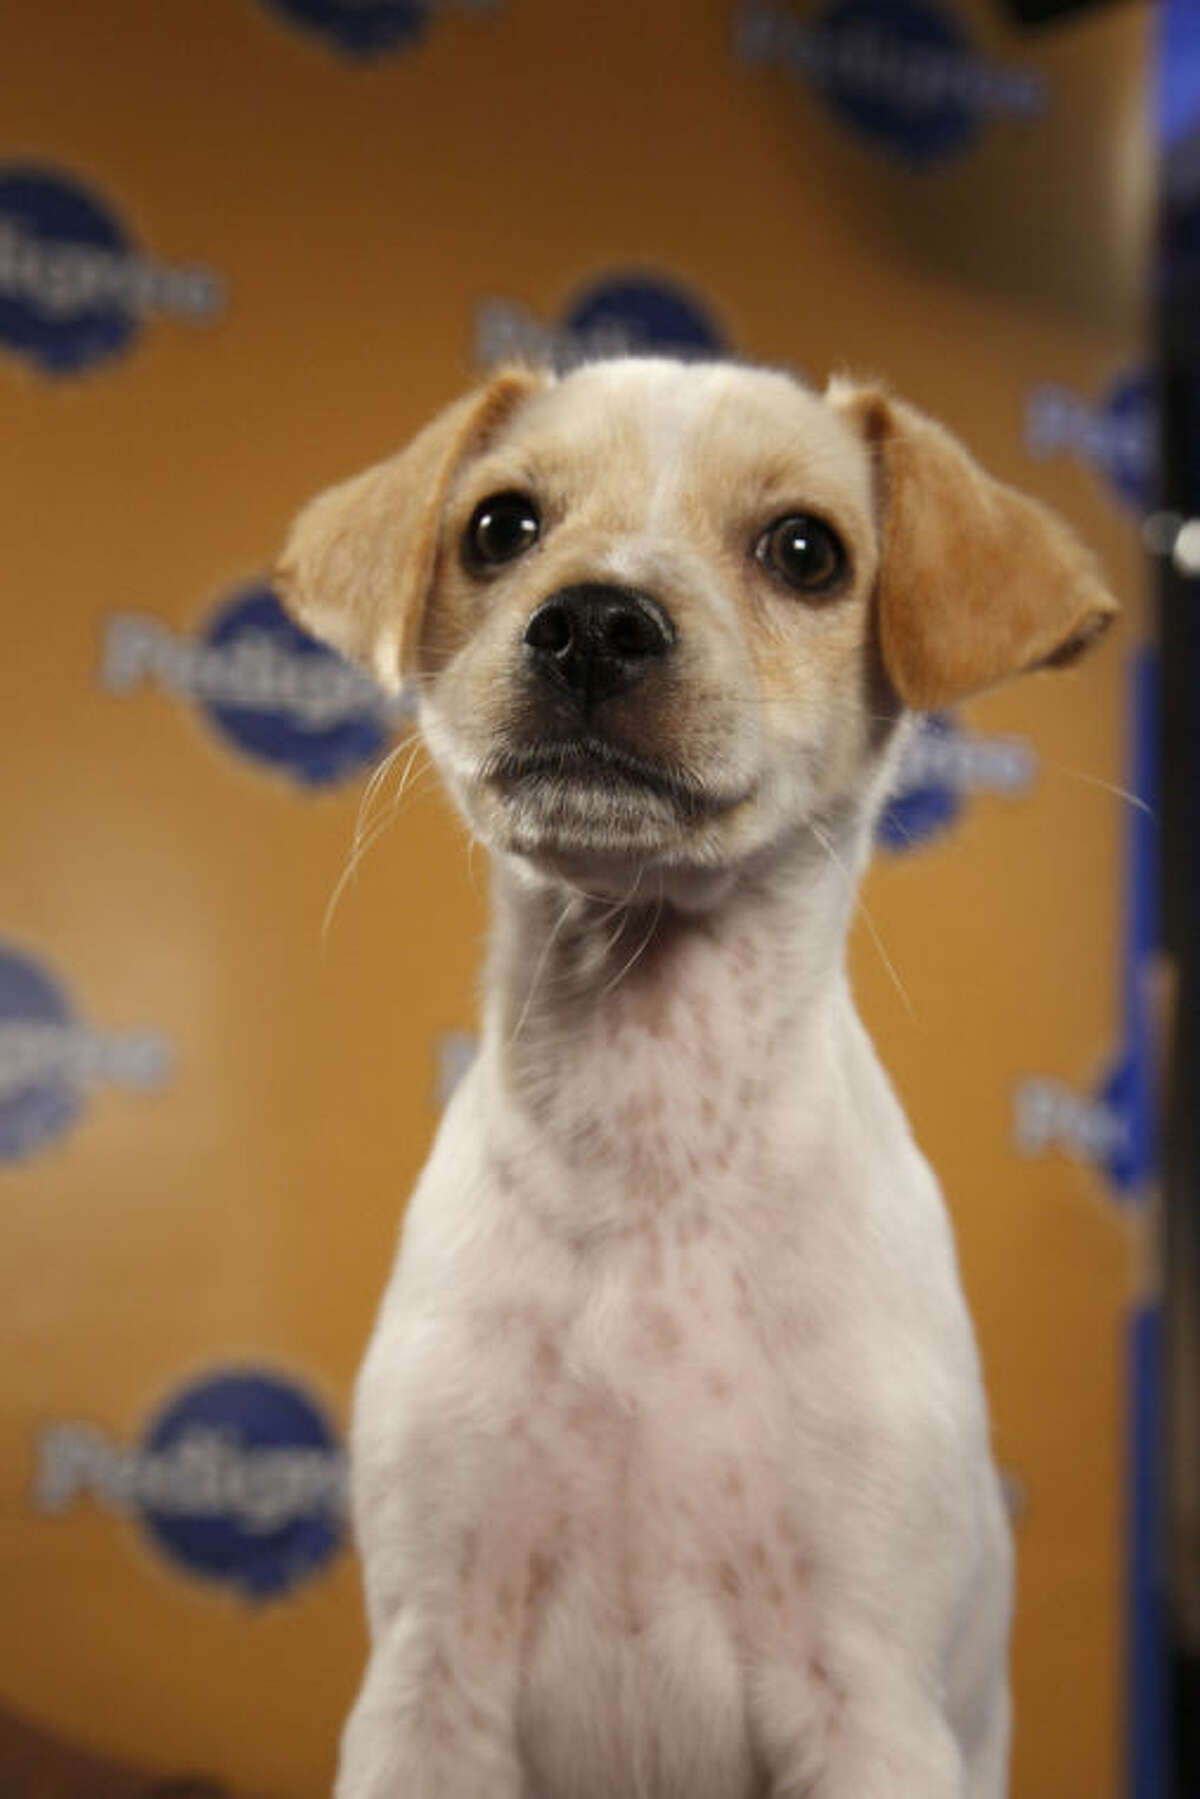 Six Connecticut rescue dogs playing in Puppy Bowl; halftime show